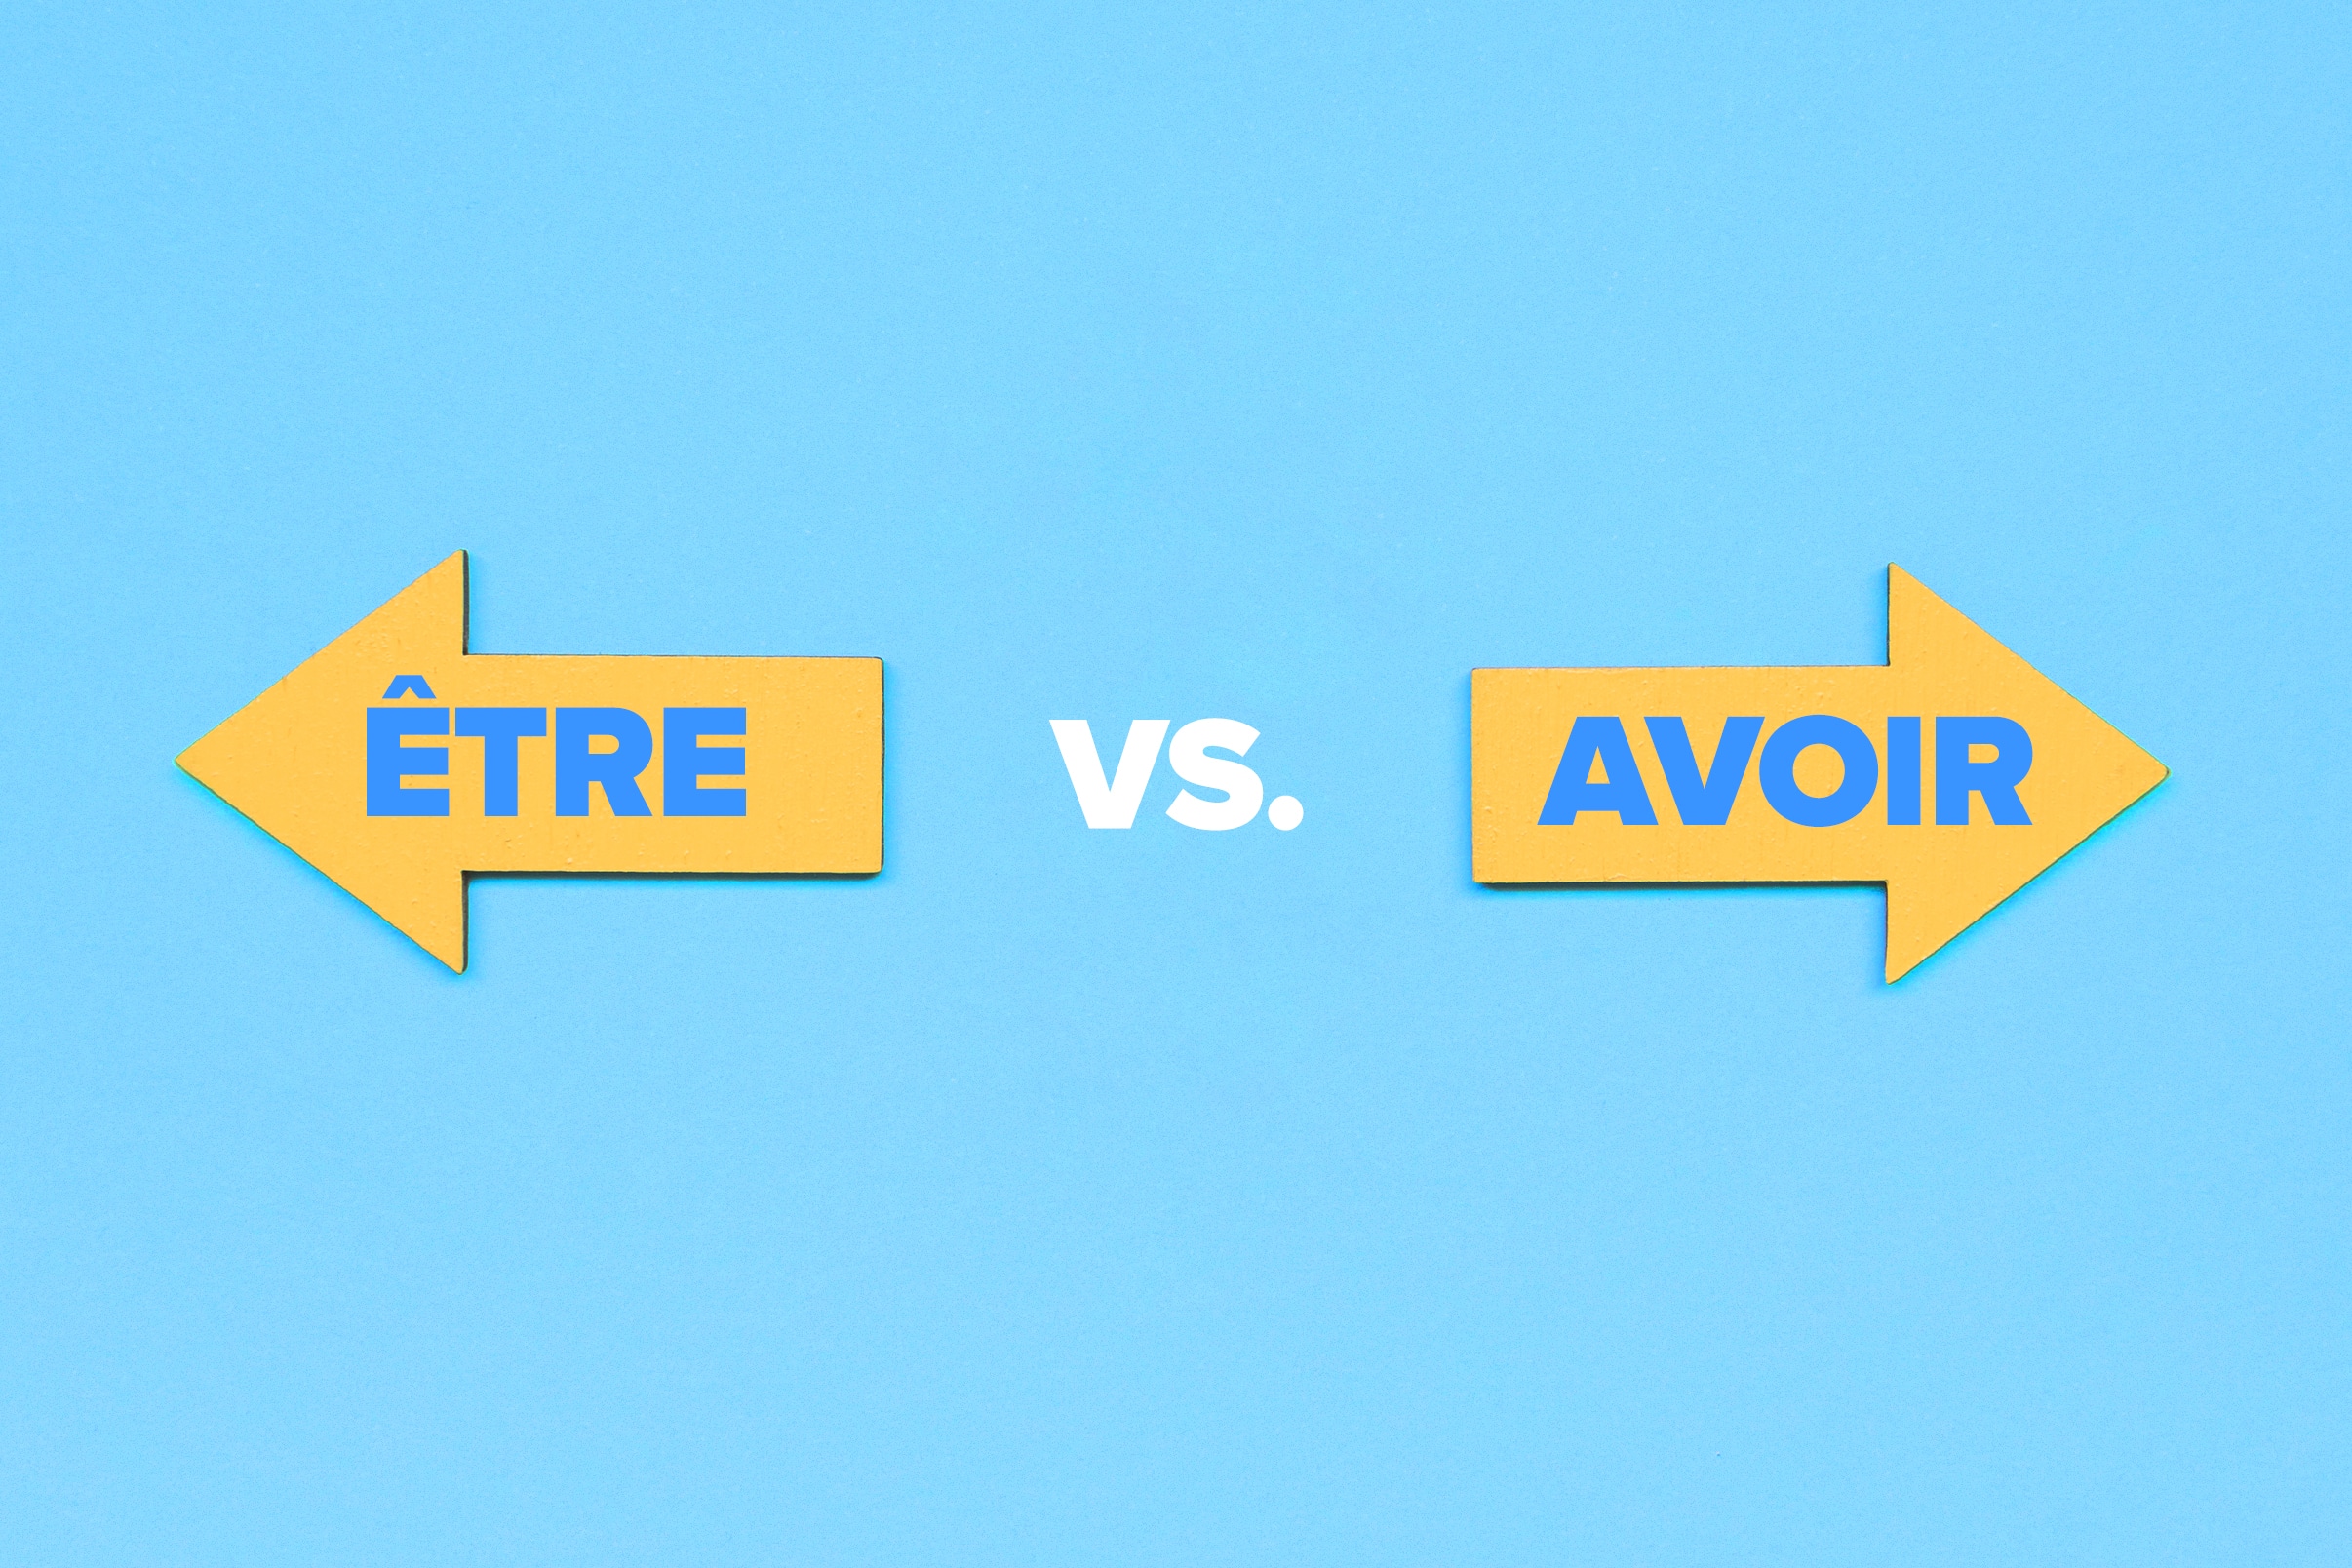 Avoir Conjugation: How To Conjugate To Have In French